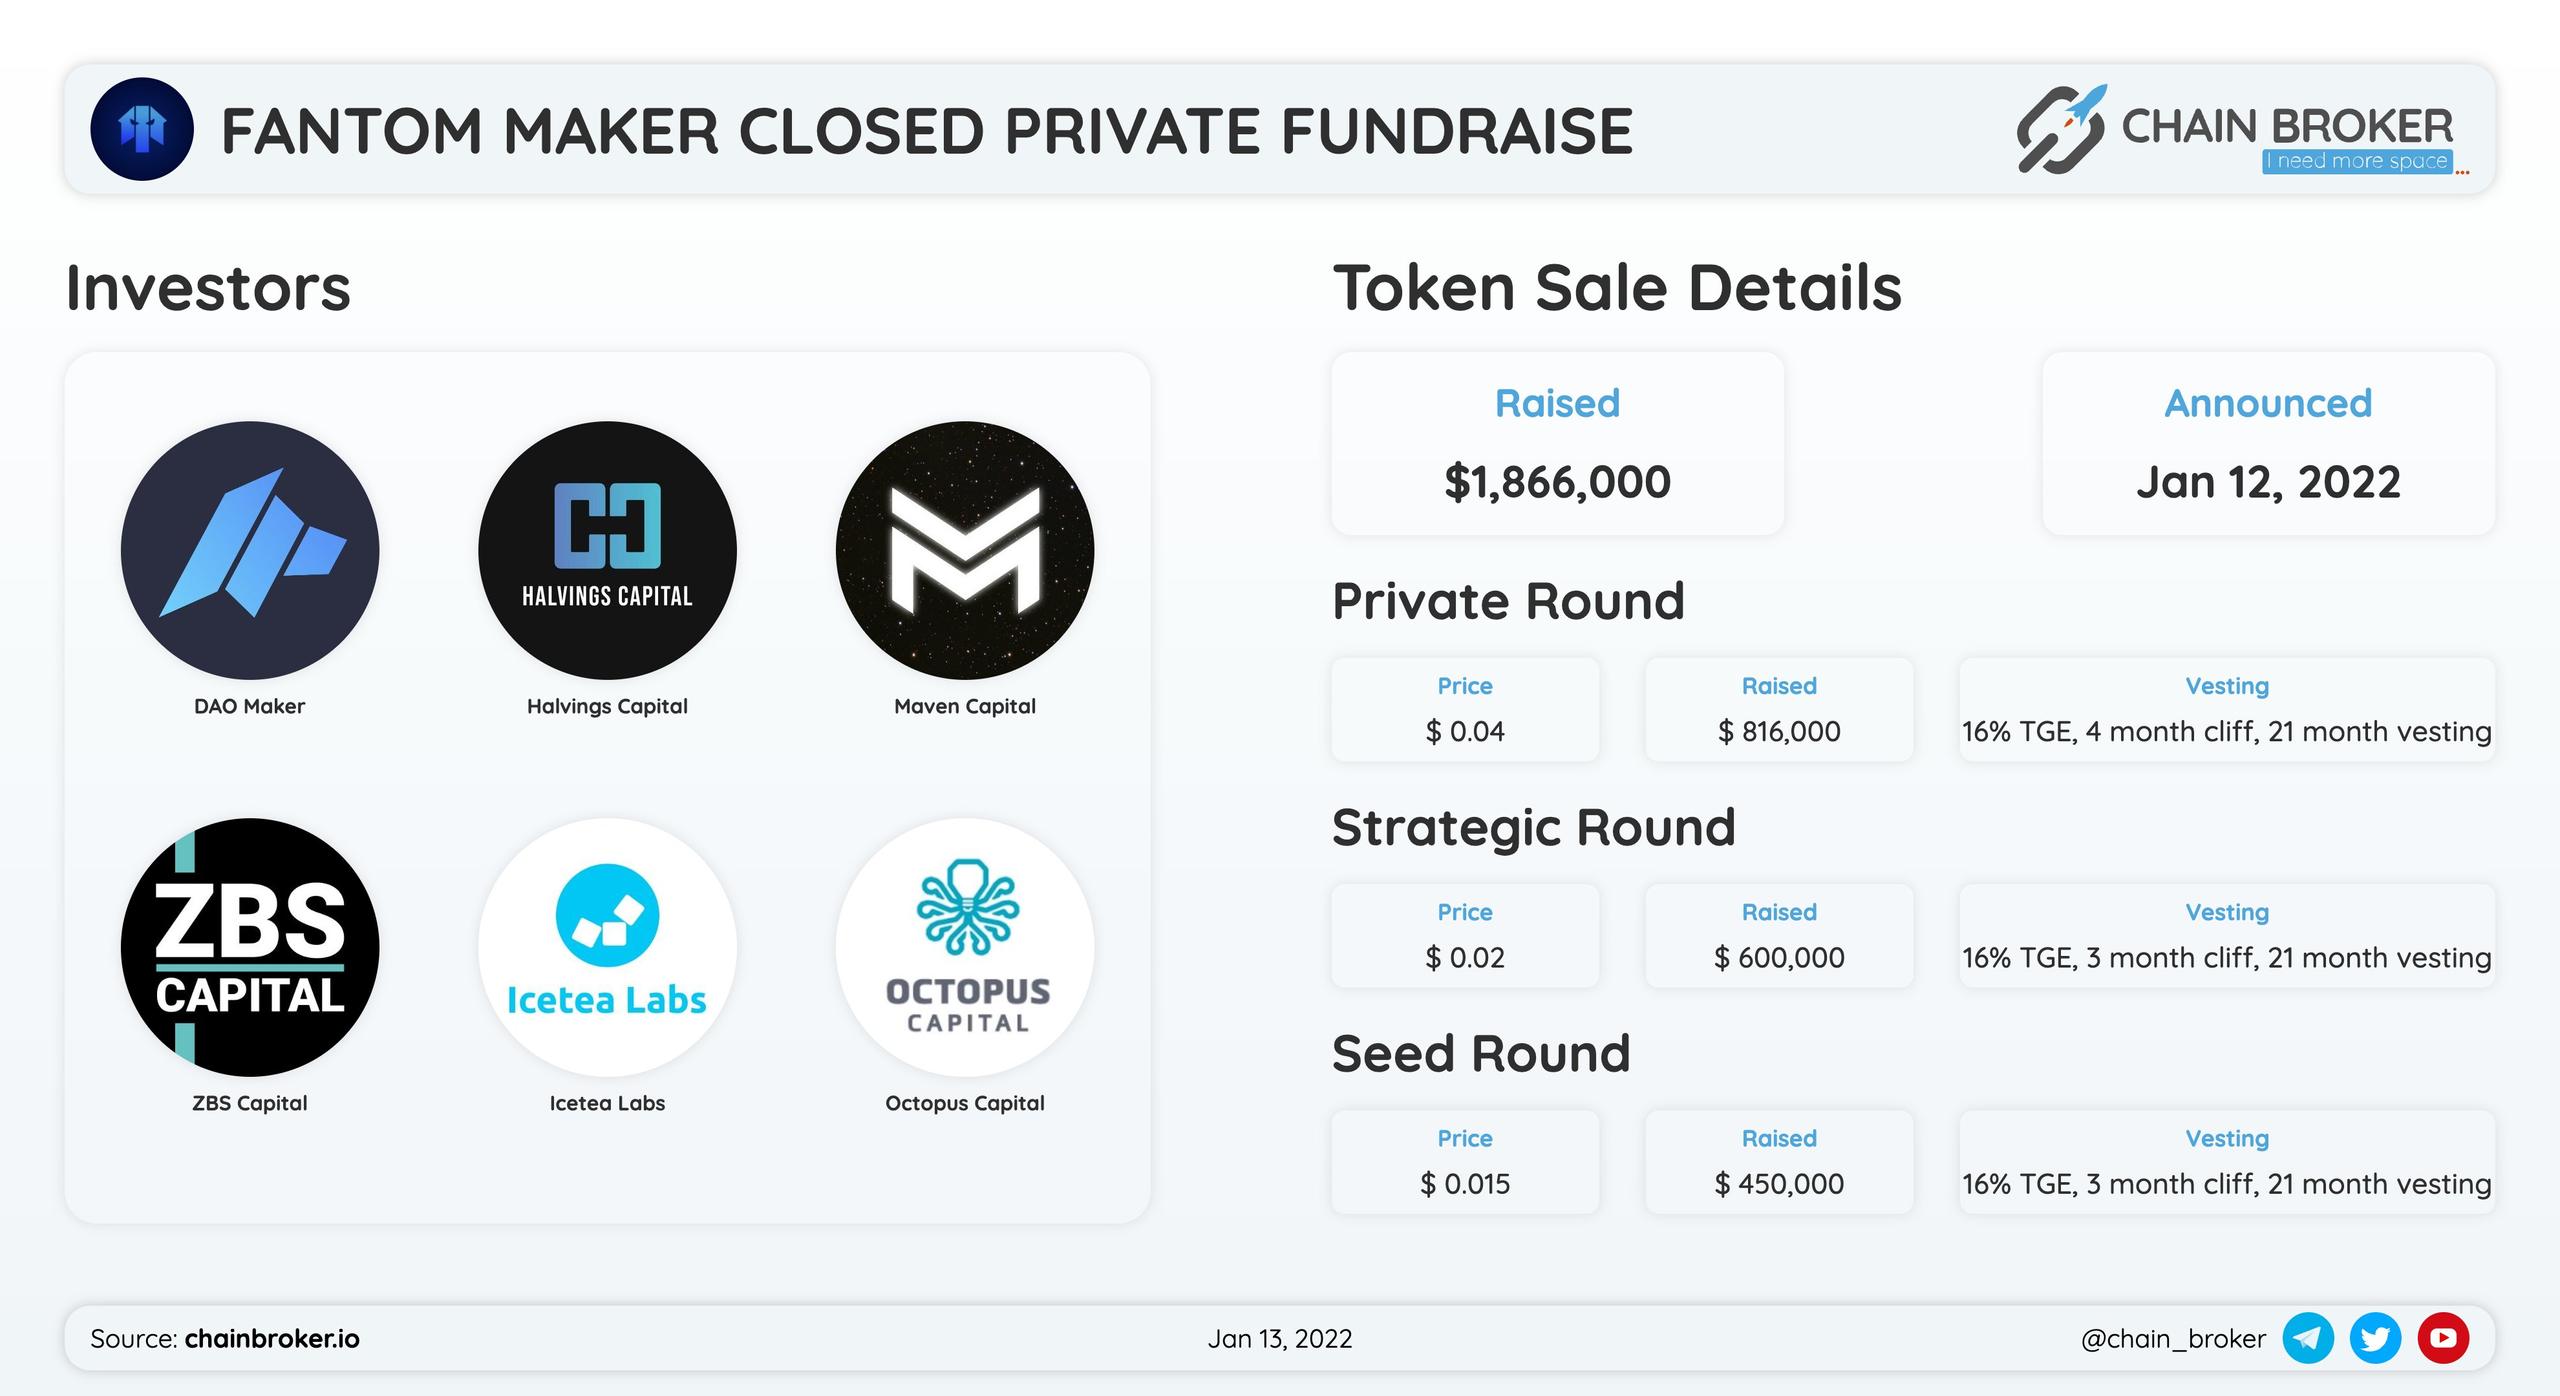 Fantom Maker $FAME has closed $1.8M Seed/Private Round.